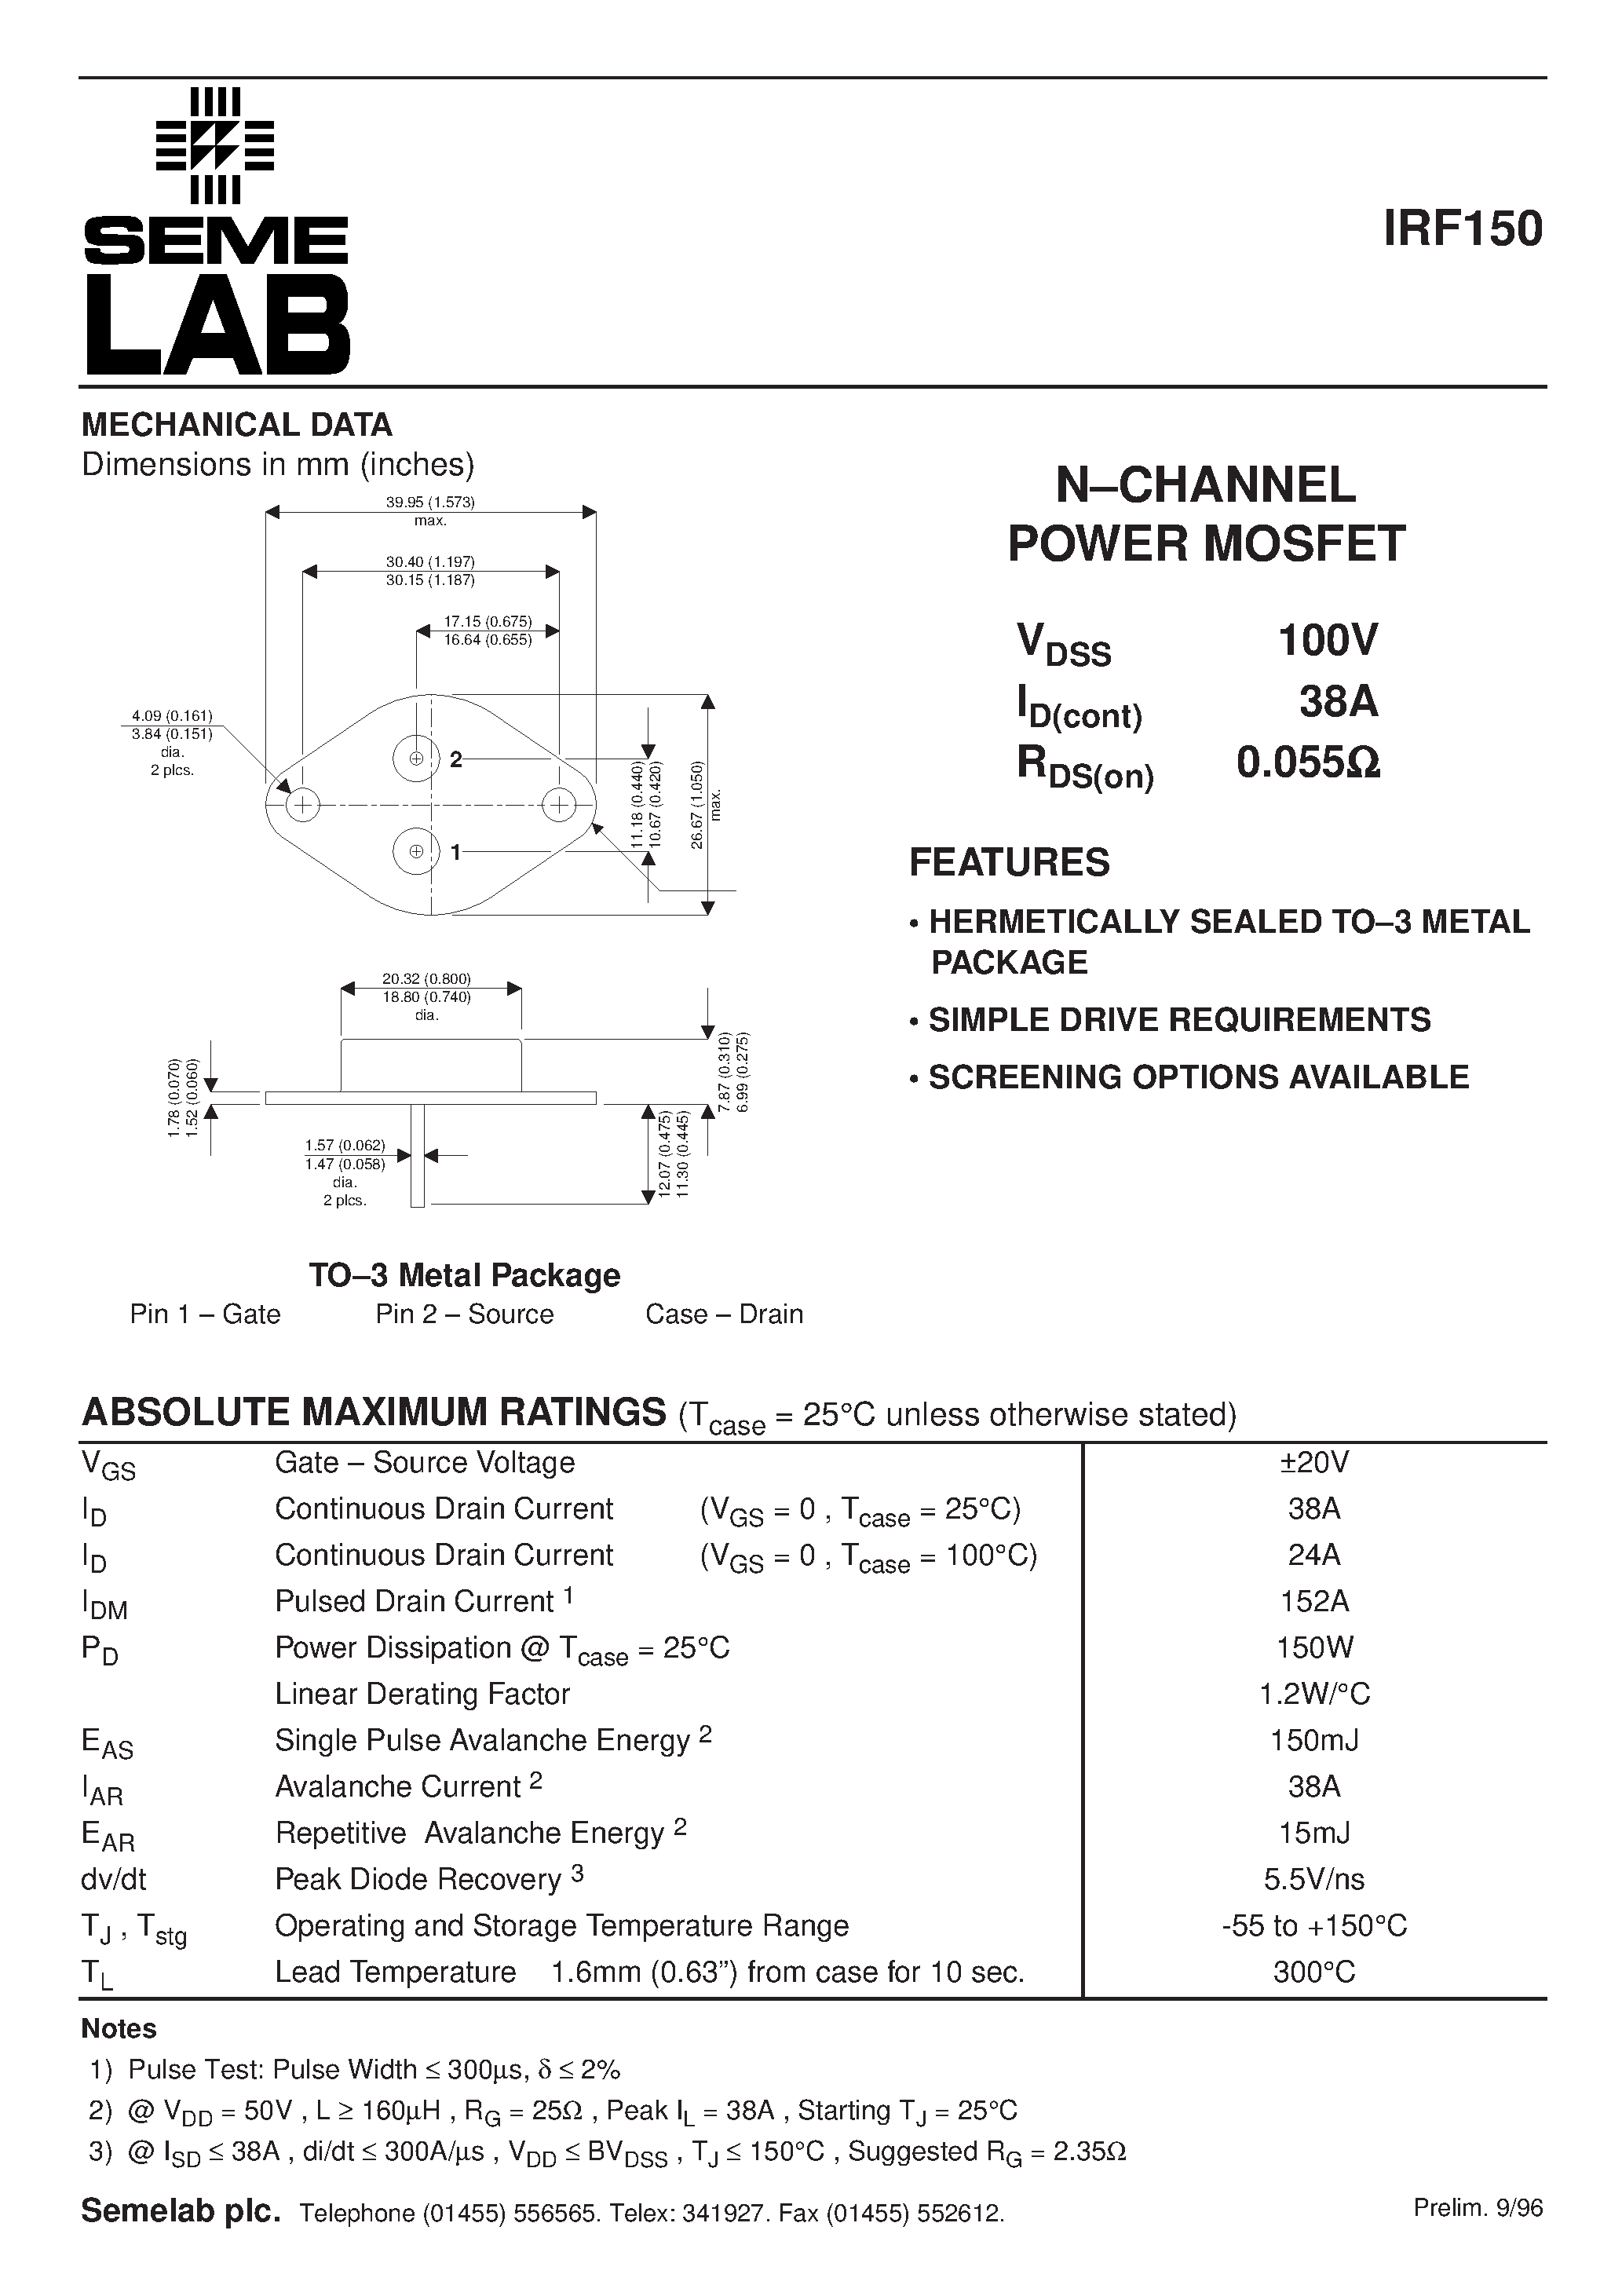 Даташит IRF150 - N-CHANNEL POWER MOSFET страница 1